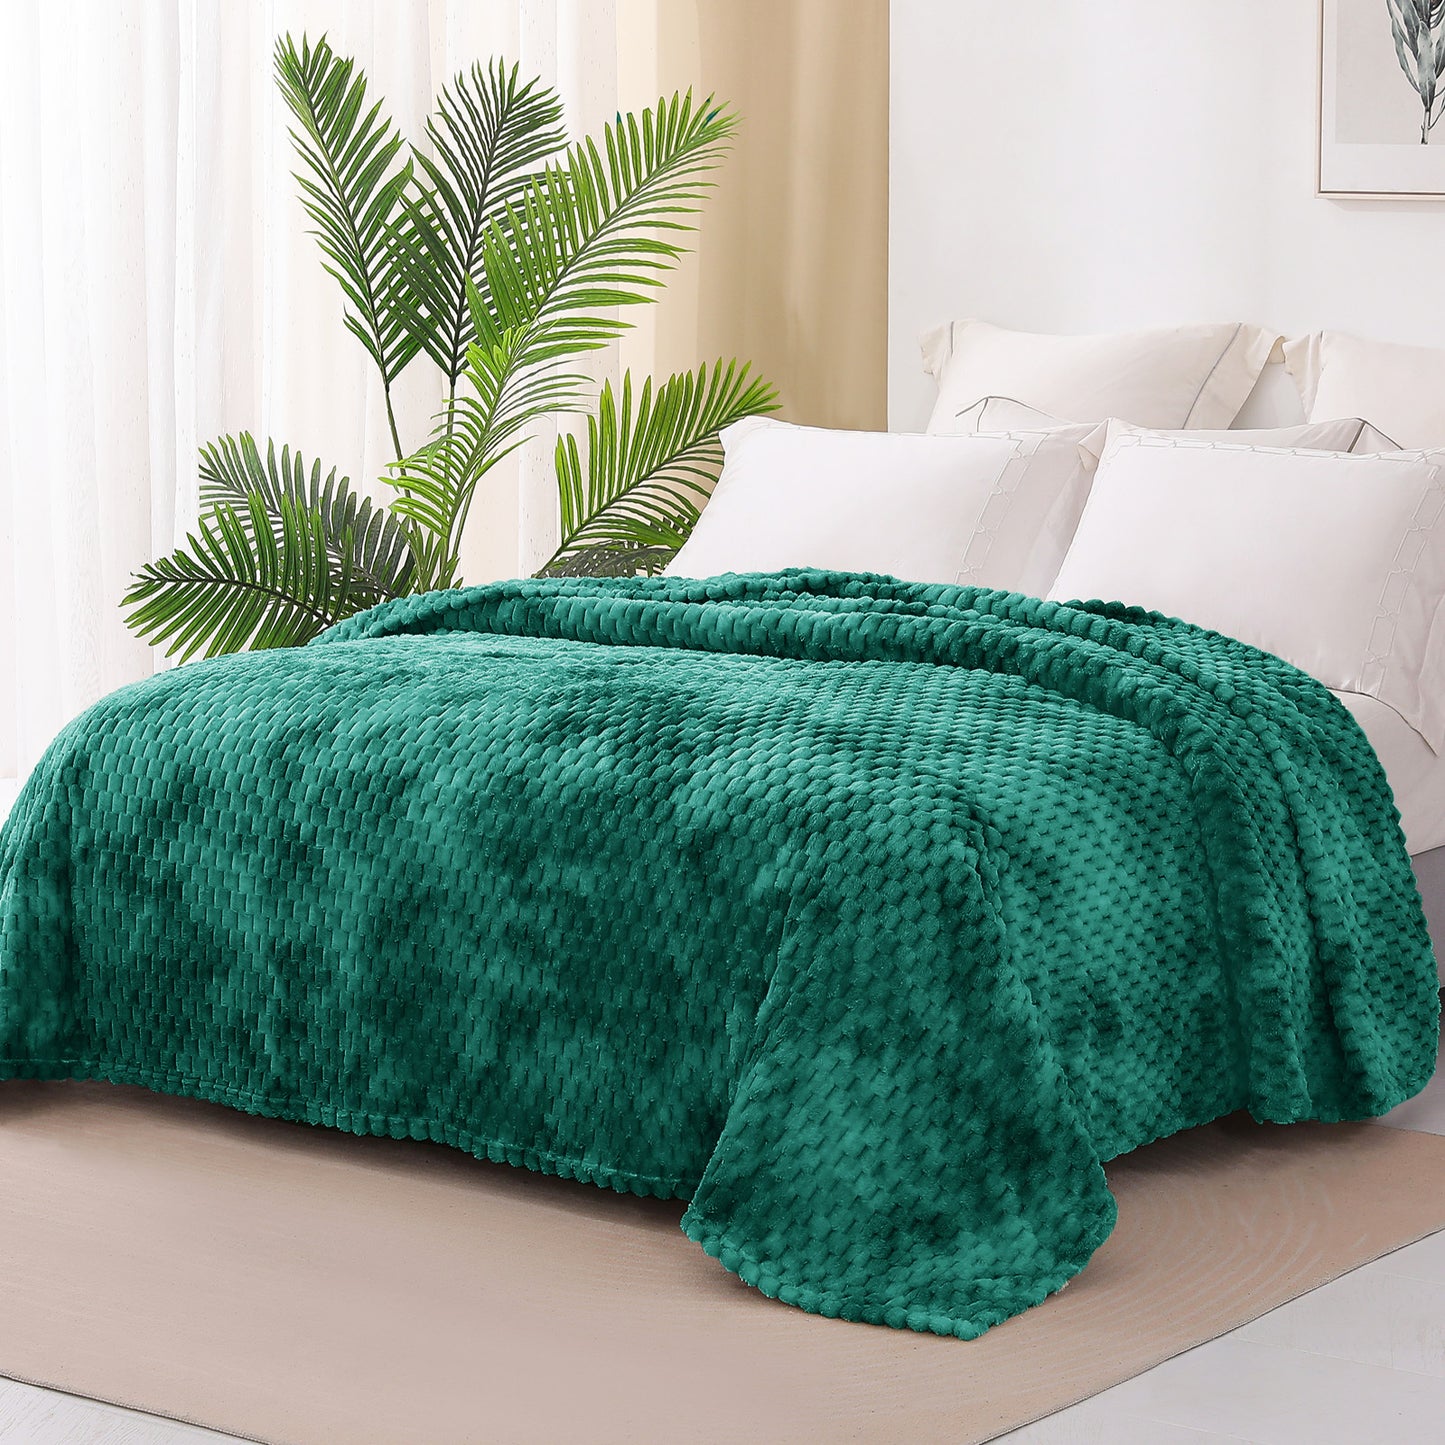 Exclusivo Mezcla King Size Flannel Fleece Blanket, 90x104 Inches Stylish Jacquard Velvet Plush Blanket for Bed, Cozy, Warm, Lightweight and Decorative Teal Blanket